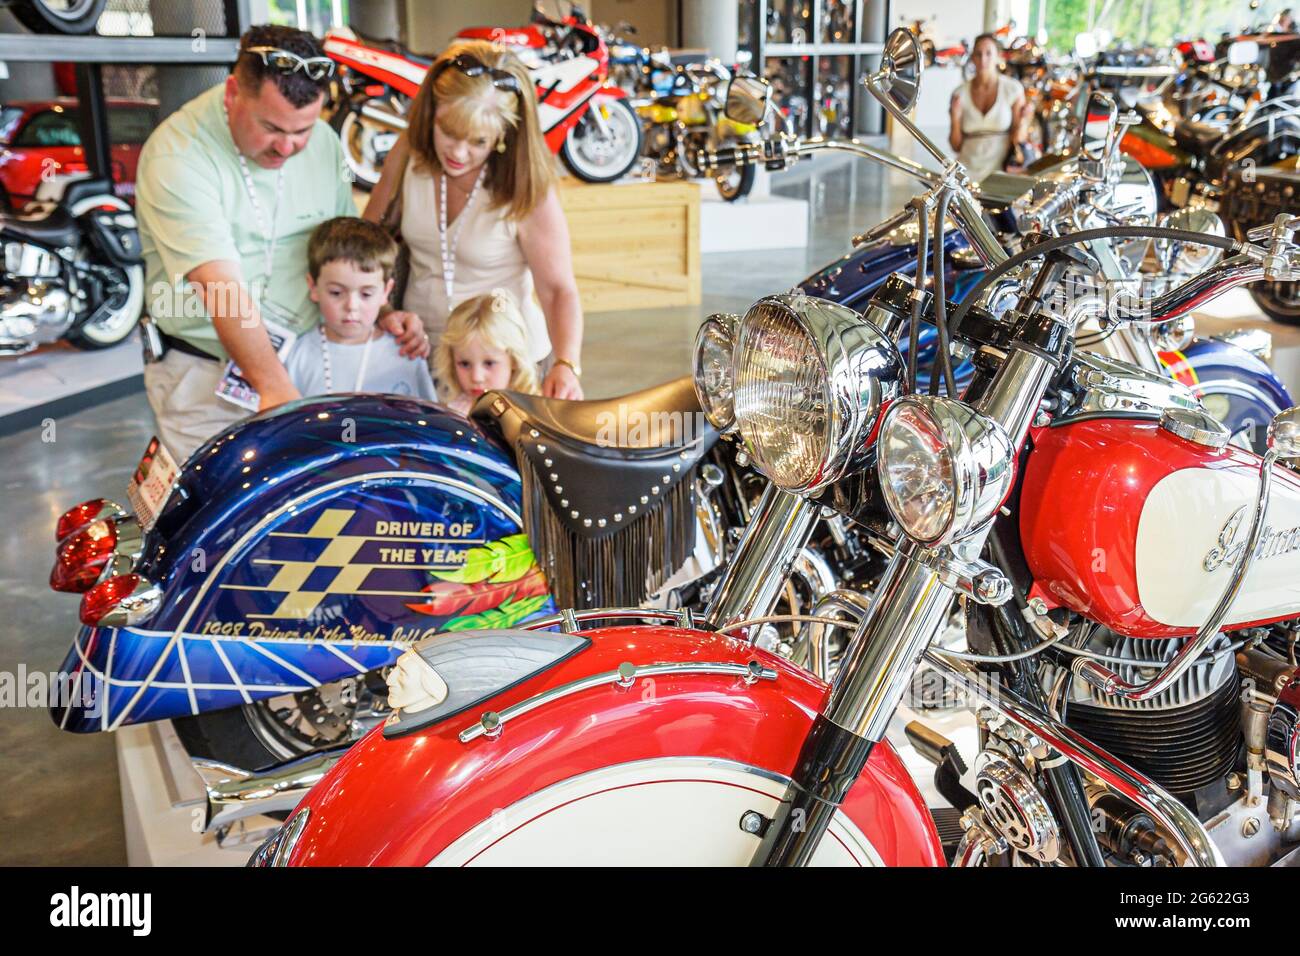 Birmingham Alabama,Barber Vintage Motorsports Museum,motorcycle collection,visitors family father mother son daughter boy girl children looking, Stock Photo